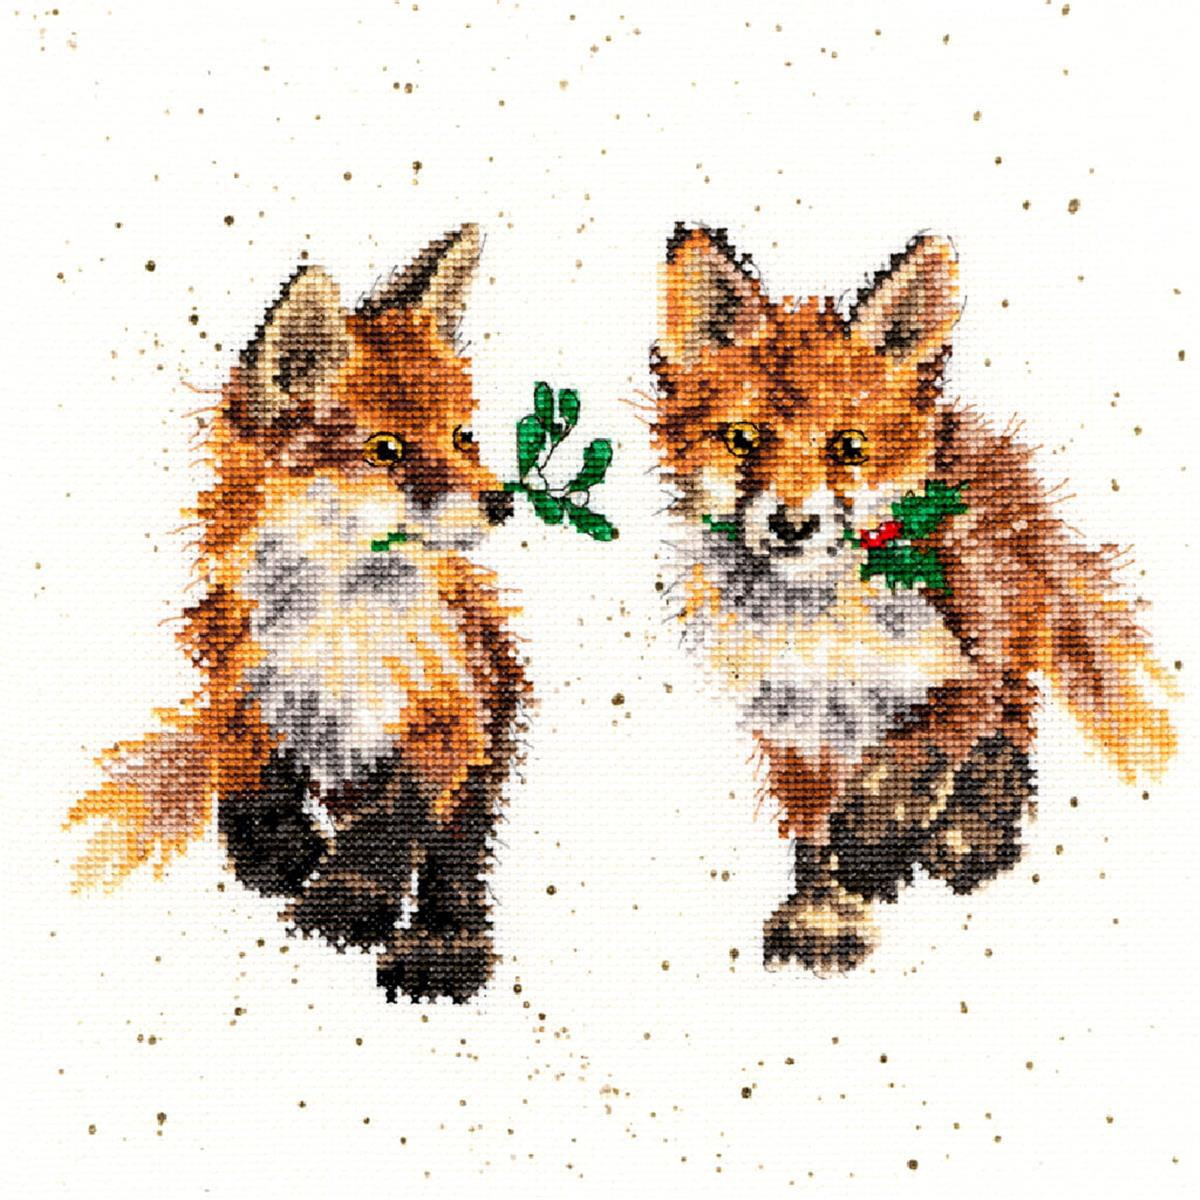 Two foxes in cross stitch, or embroidery packs from Bothy...